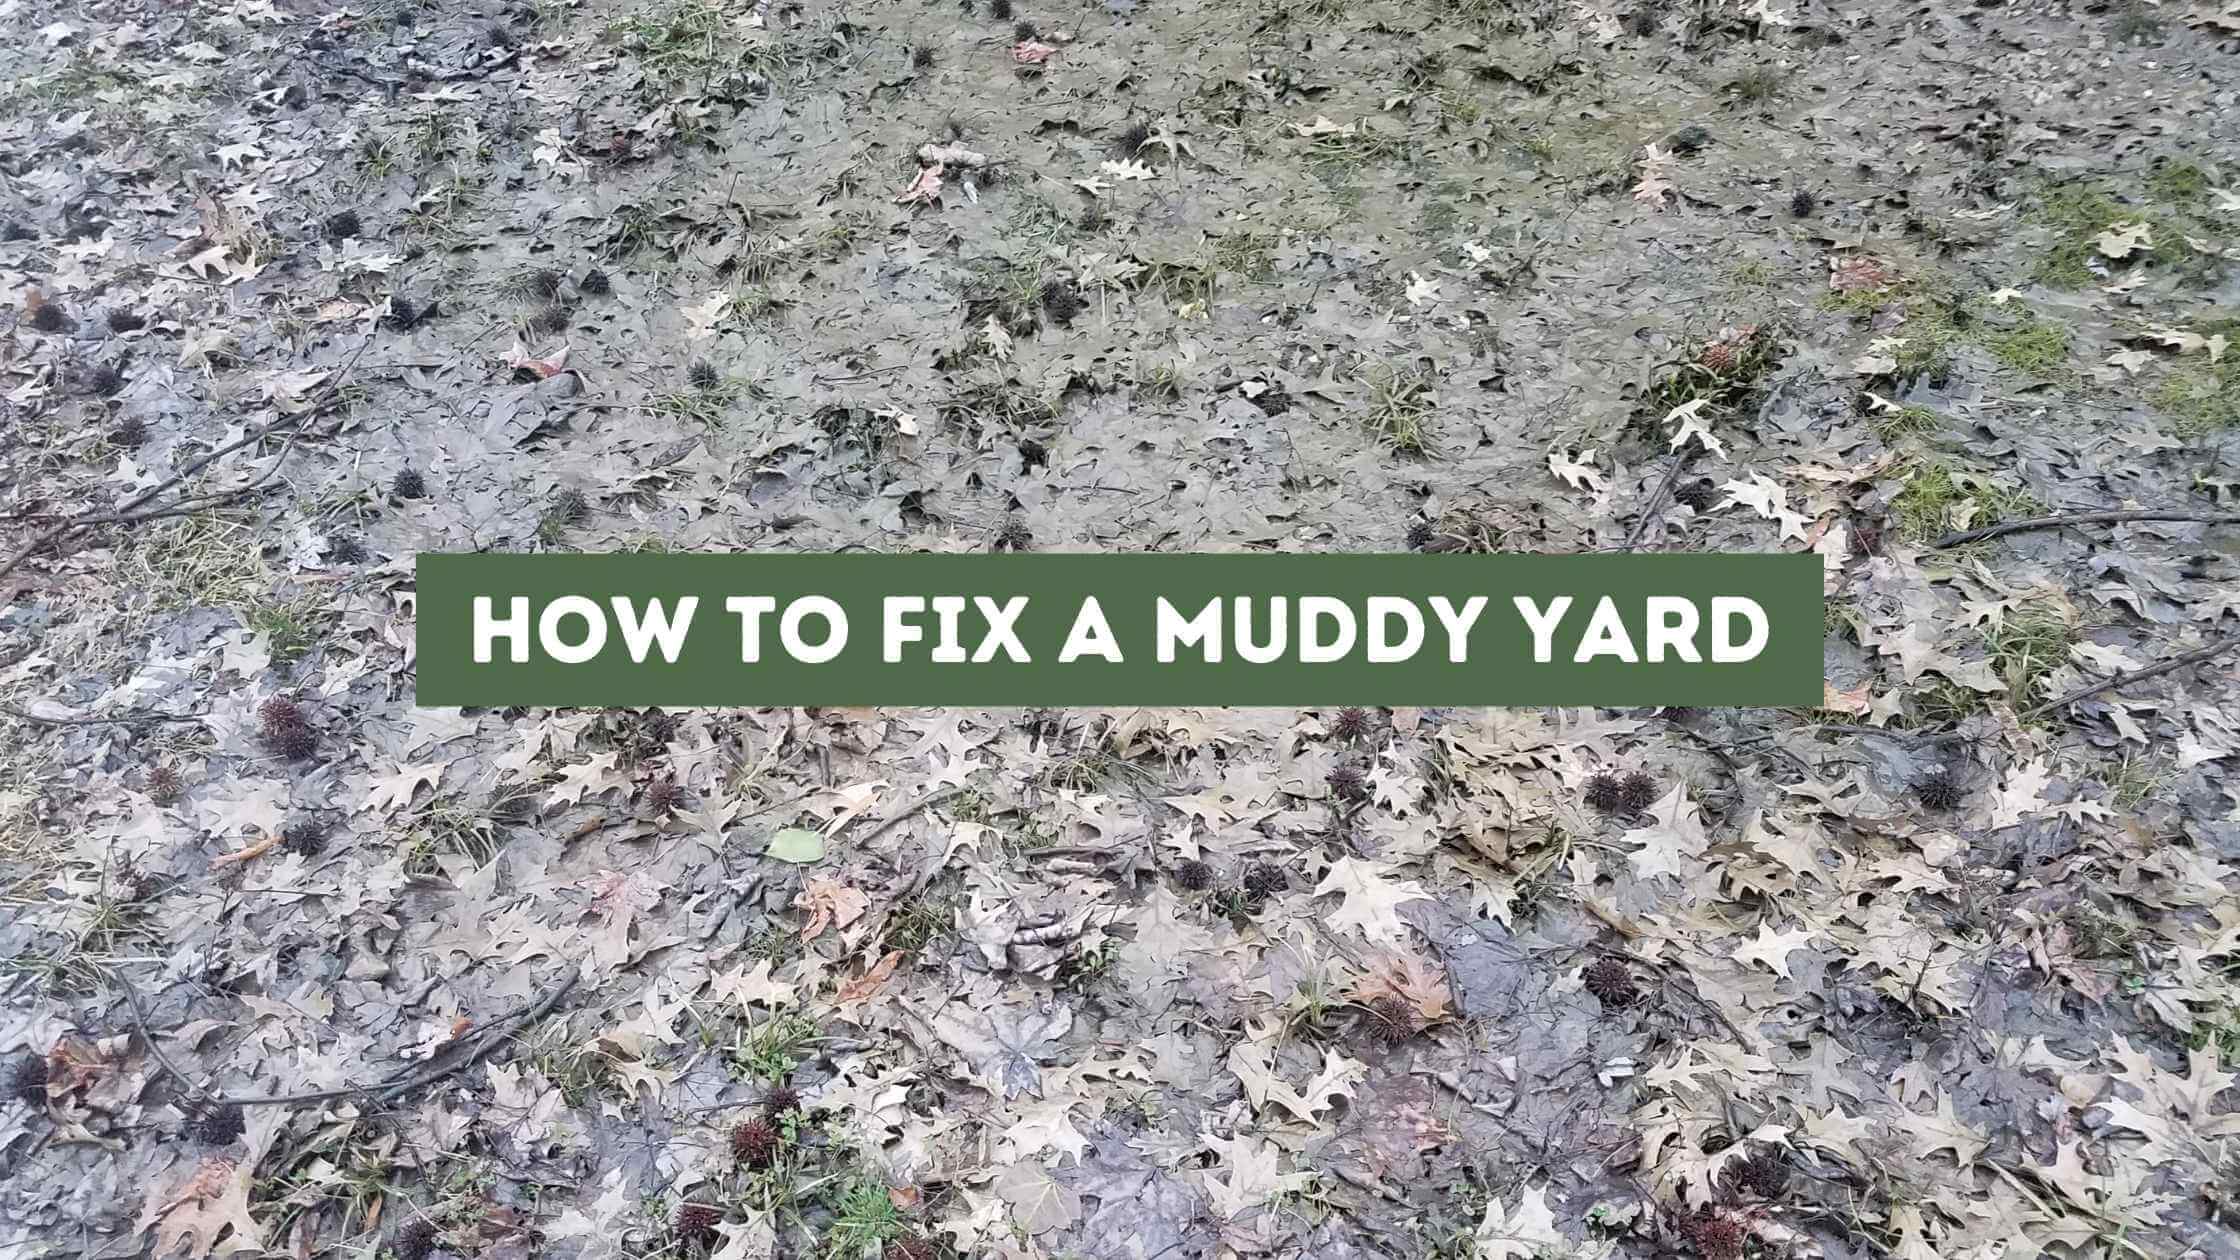 How to Fix a Muddy Yard